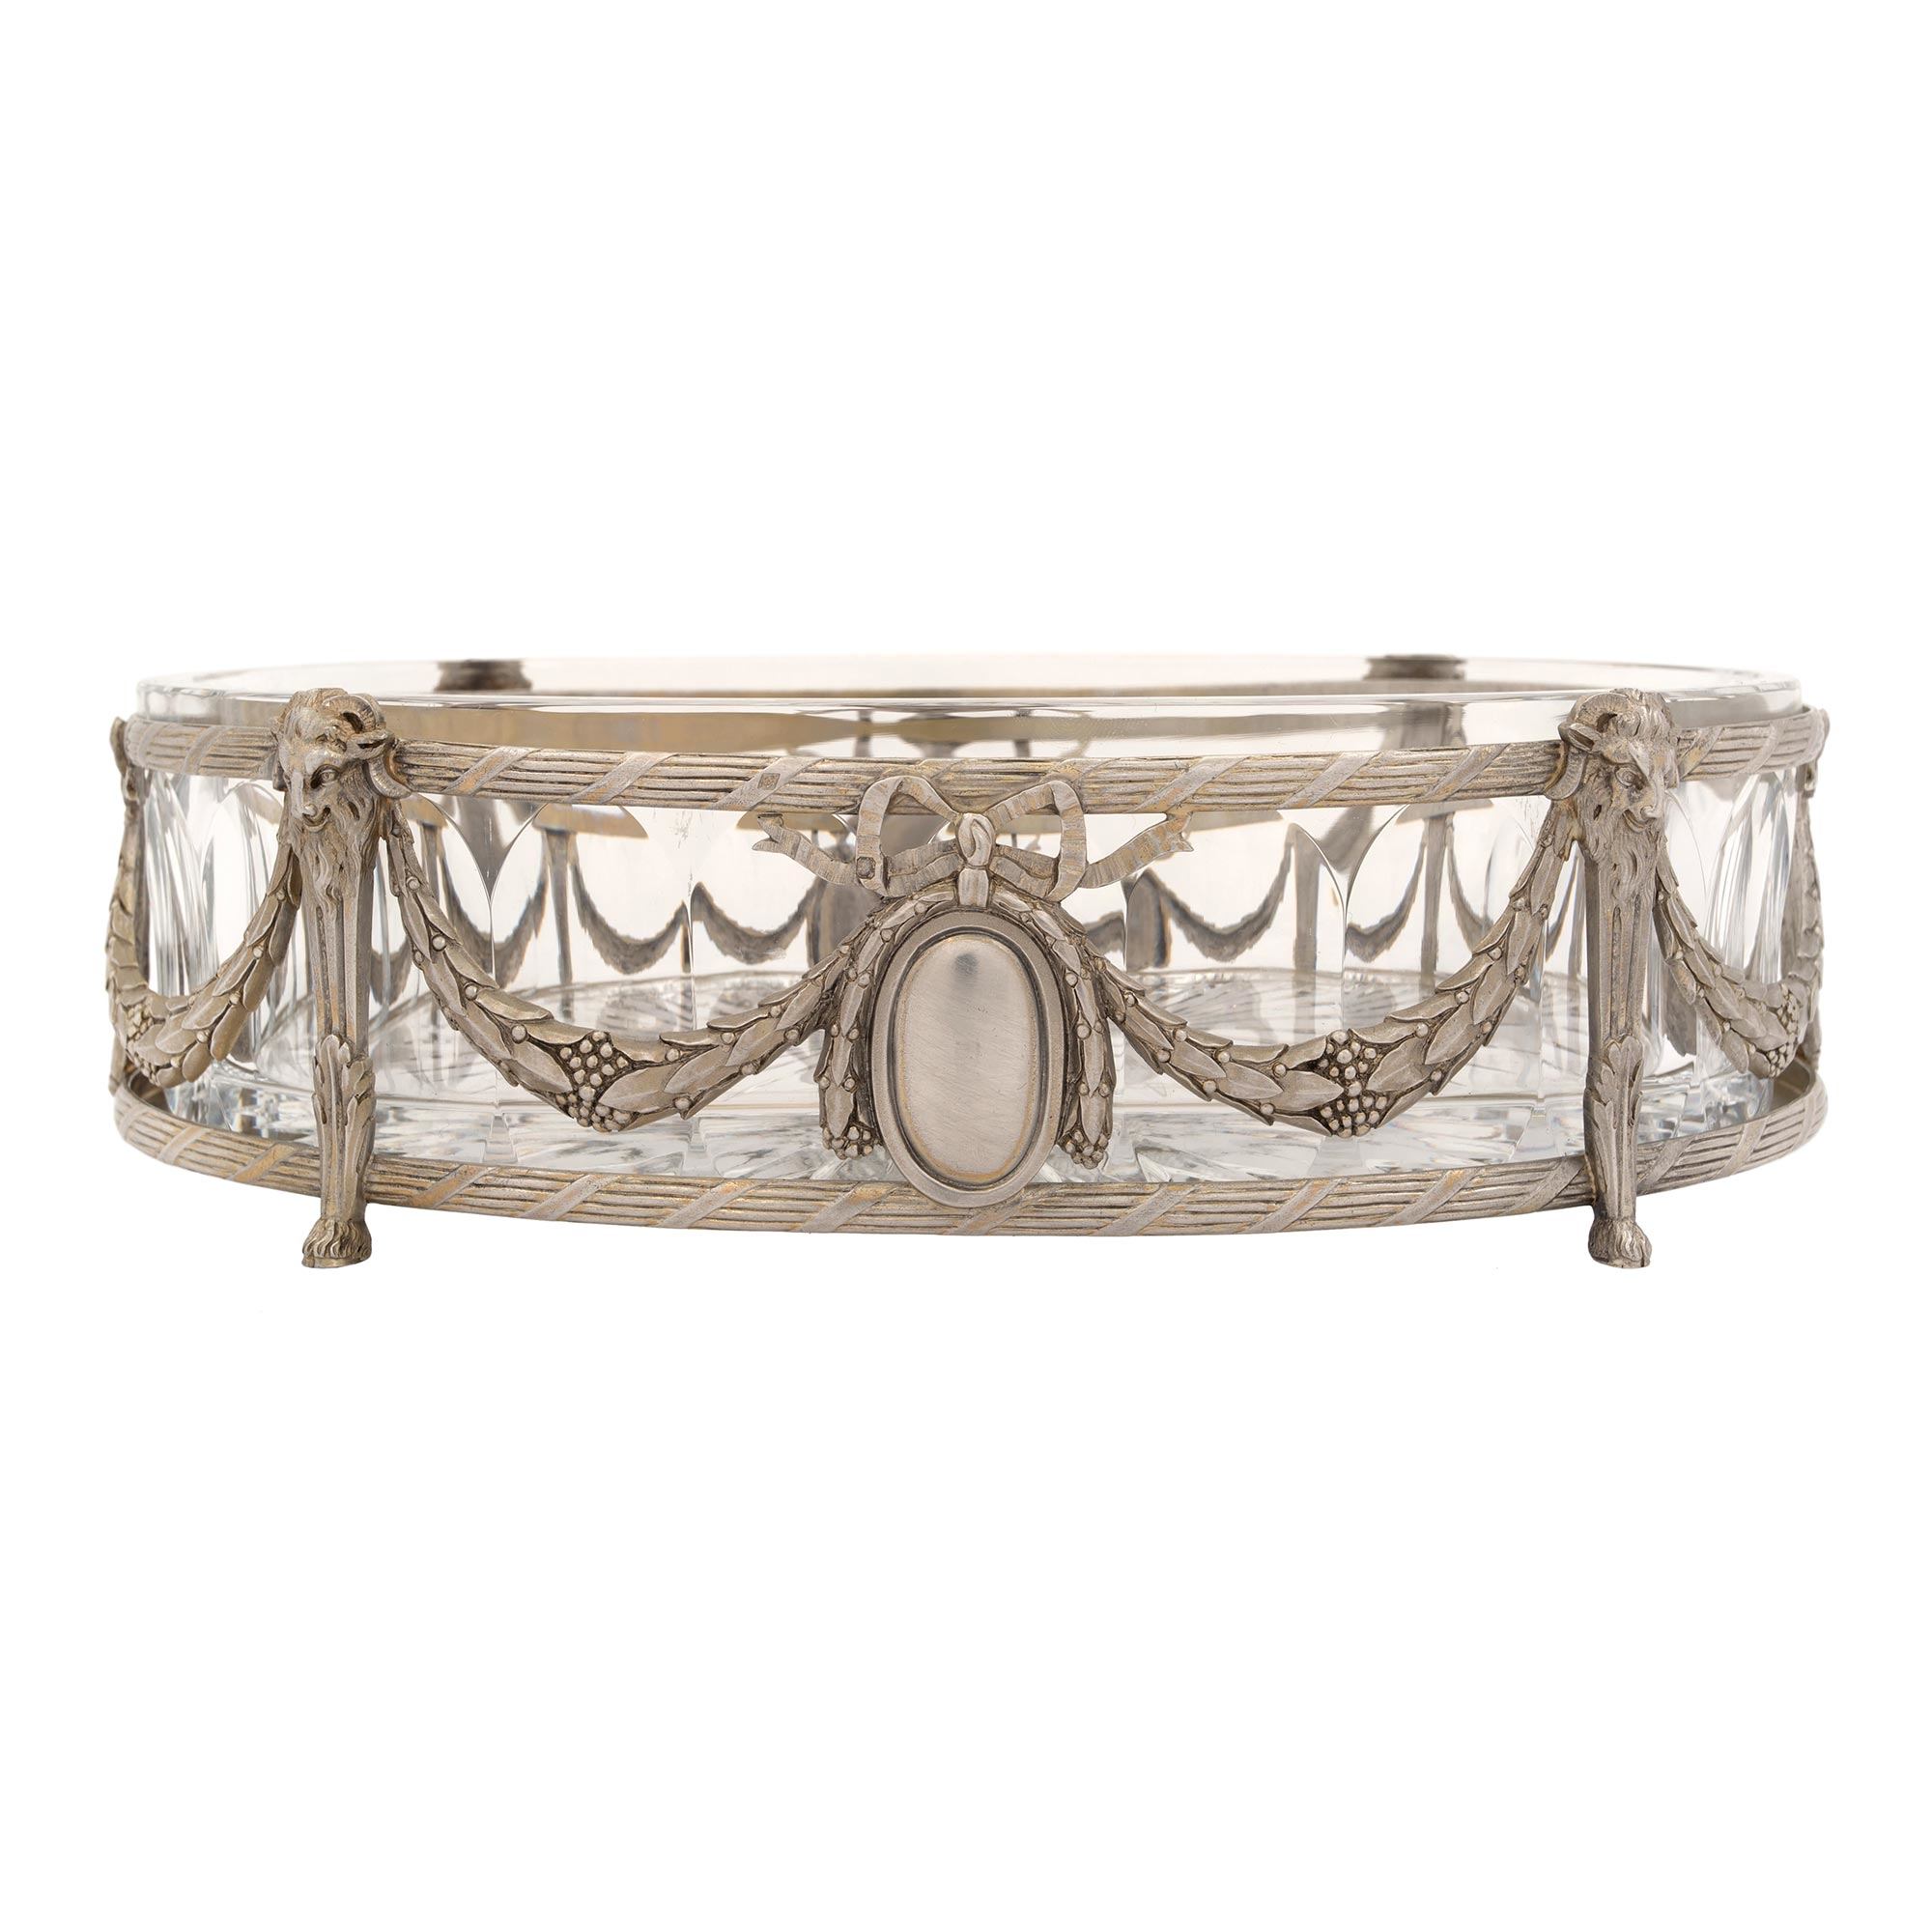 A French 19th century Louis XVI st. silvered bronze and Baccarat crystal centerpiece - Cedric ...